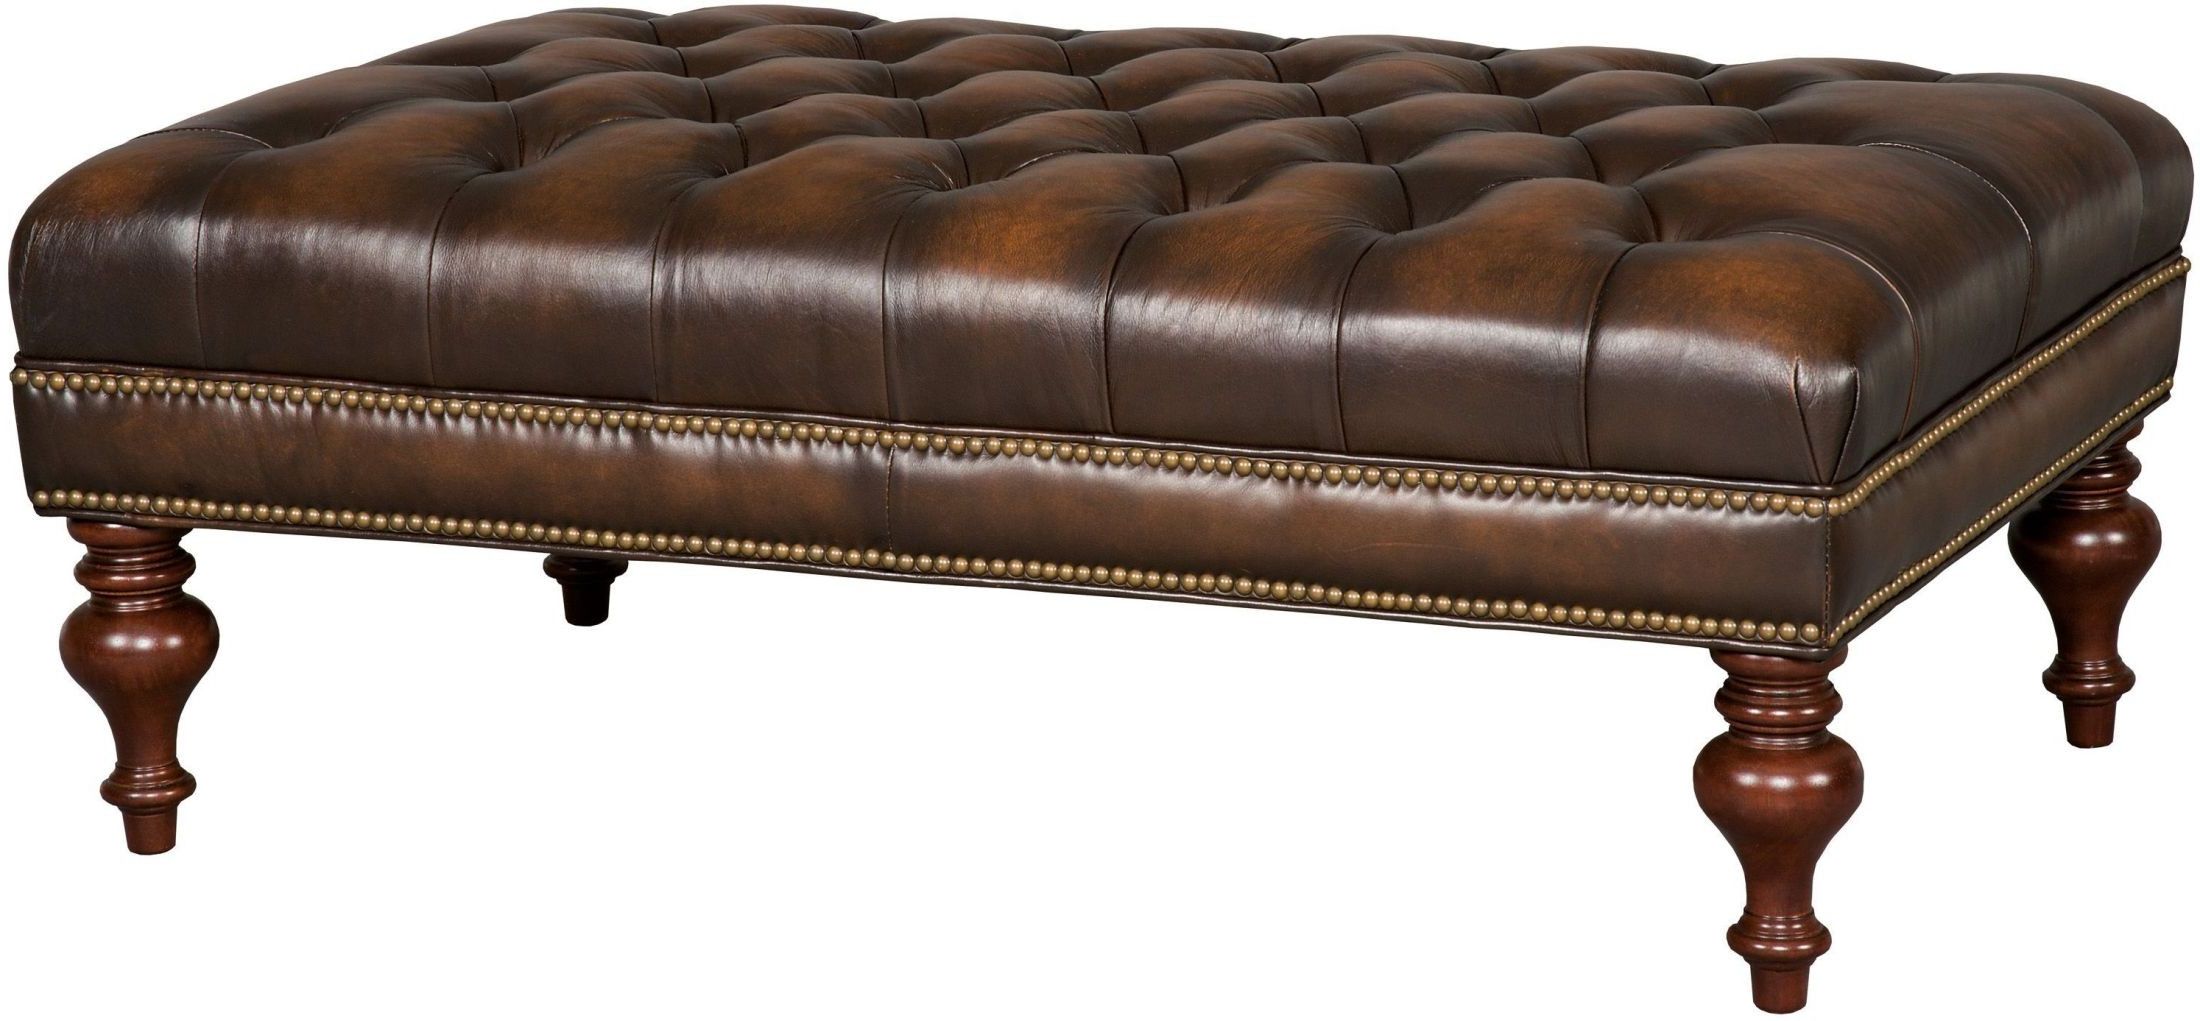 Newest Tufted Ottomans With Regard To Kingley Brown Tufted Cocktail Leather Ottoman From Hooker (View 10 of 10)